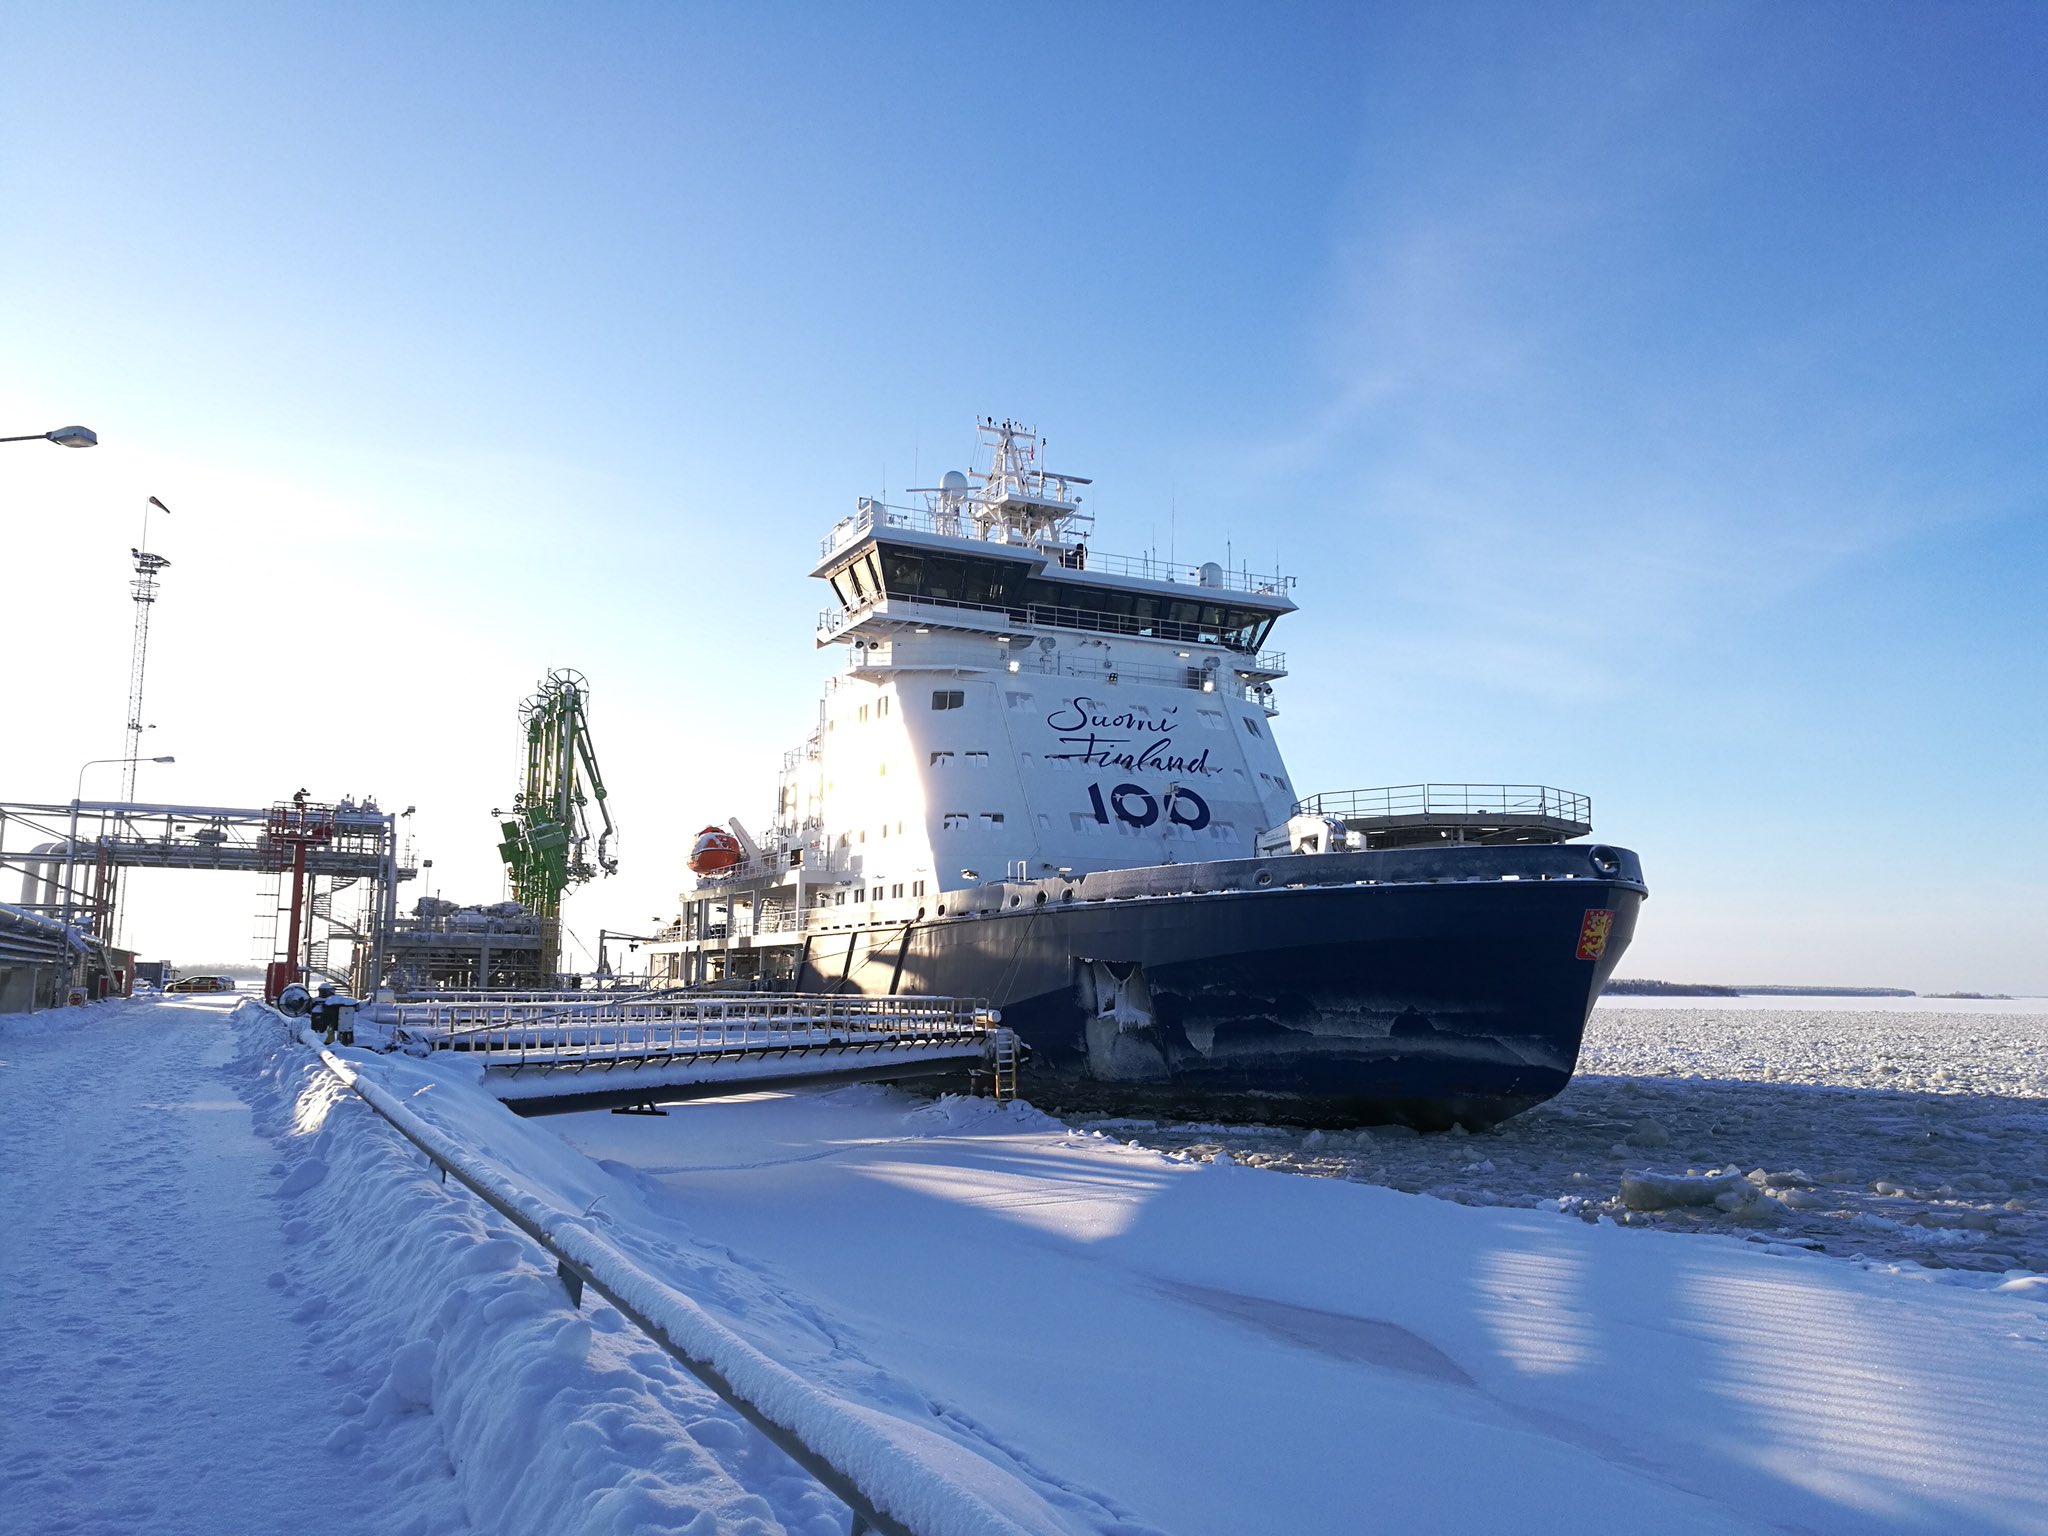 Finland’s LNG-fueled icebreaker bunkers in Tornio